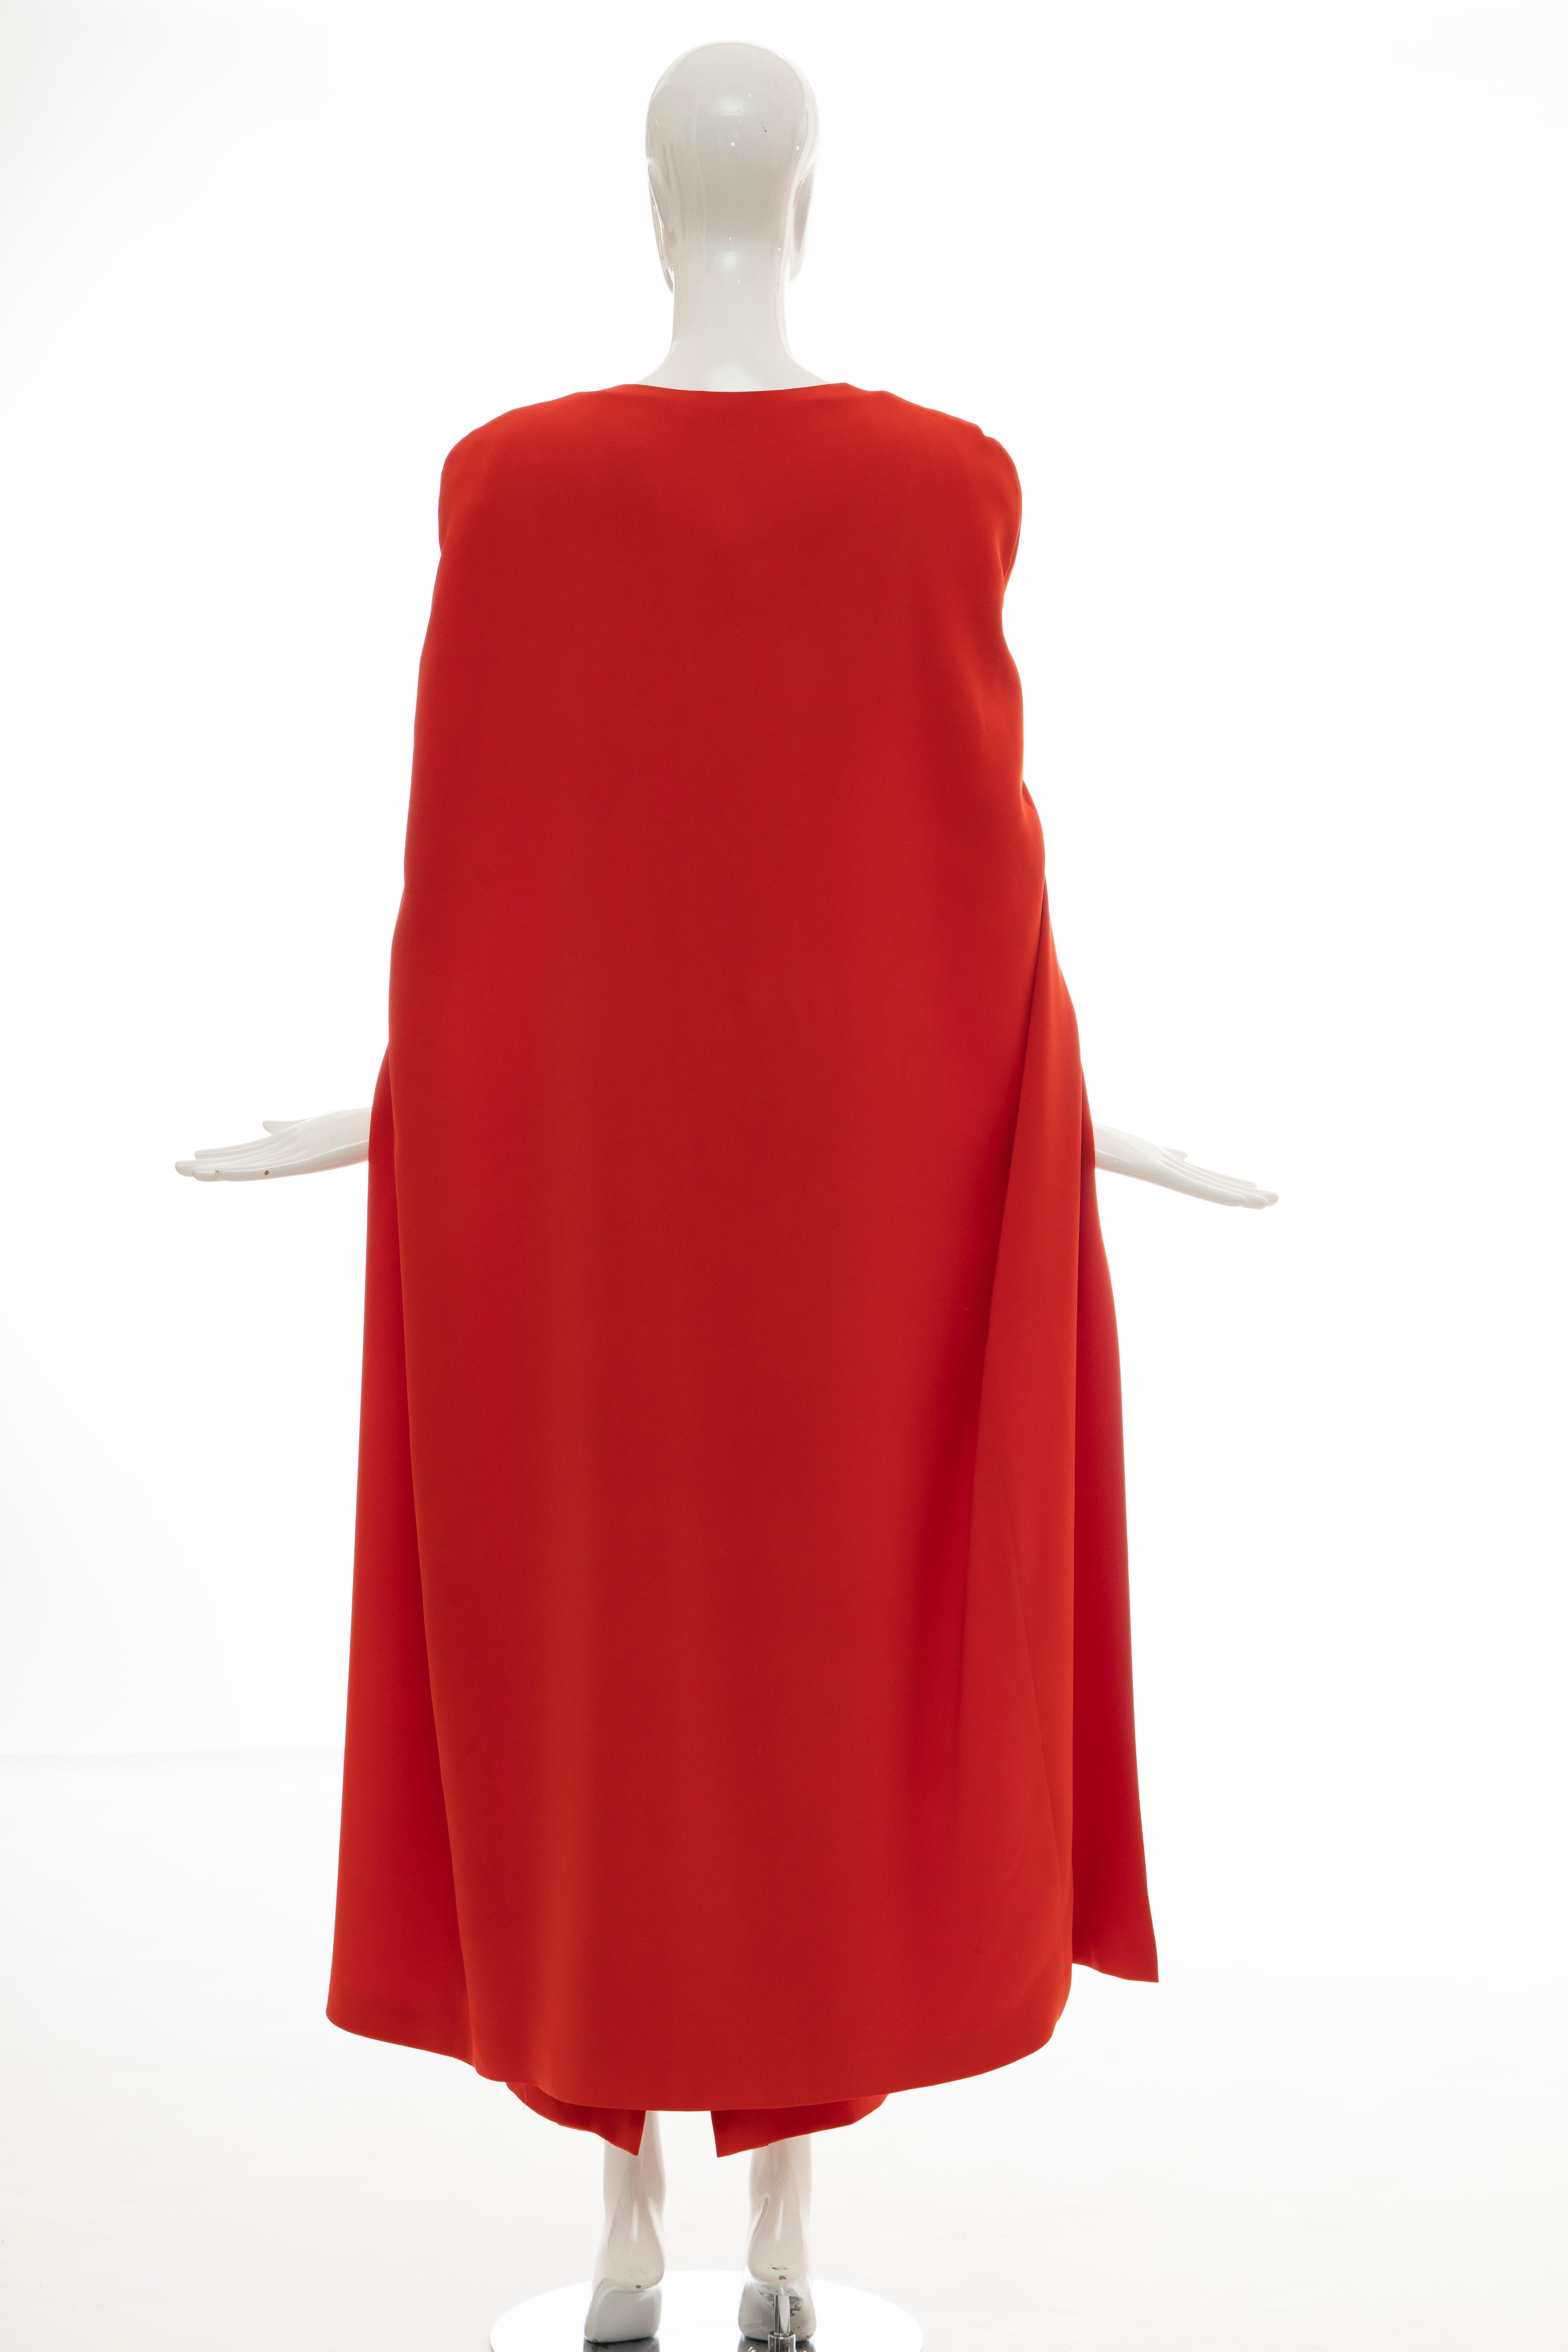 Tom Ford Runway Silk Persimmon Evening Dress With Cape, Fall 2012 2